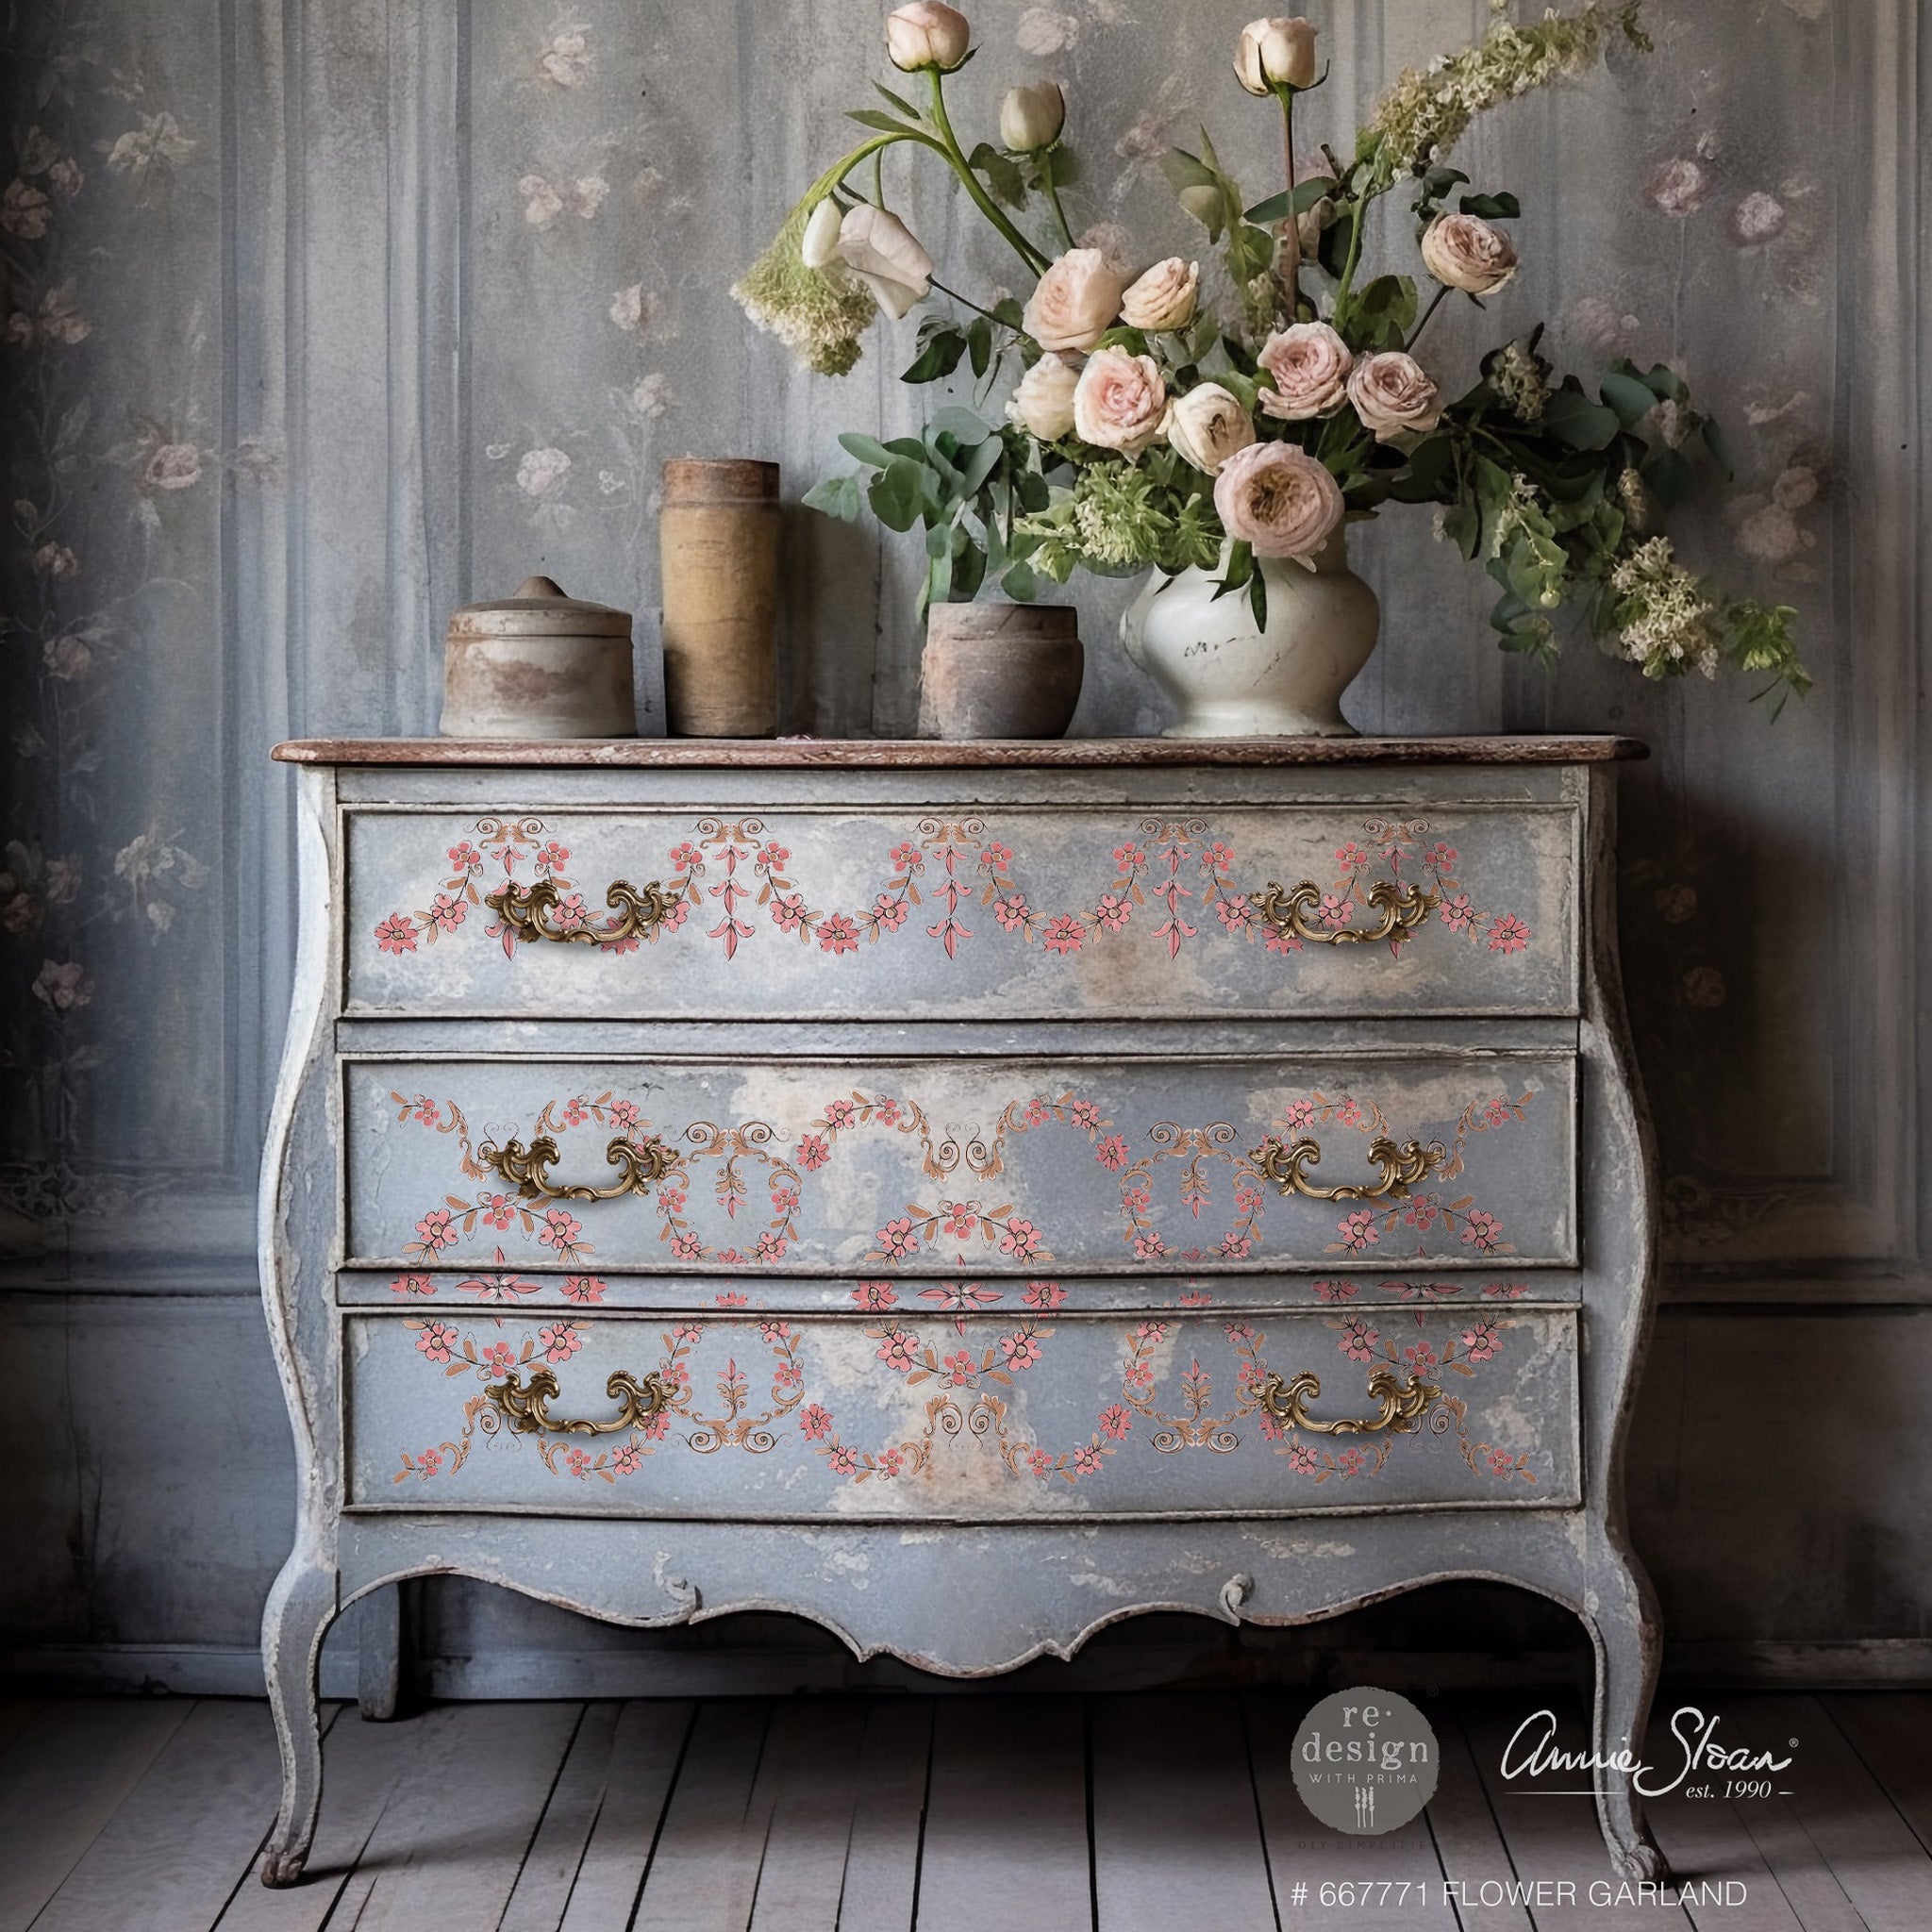 A vintage 3-drawer dresser refurbished by Annie Sloan is painted light gray and features ReDesign with Prima's Annie Sloan Flower Garland rub-on transfer on the drawers.